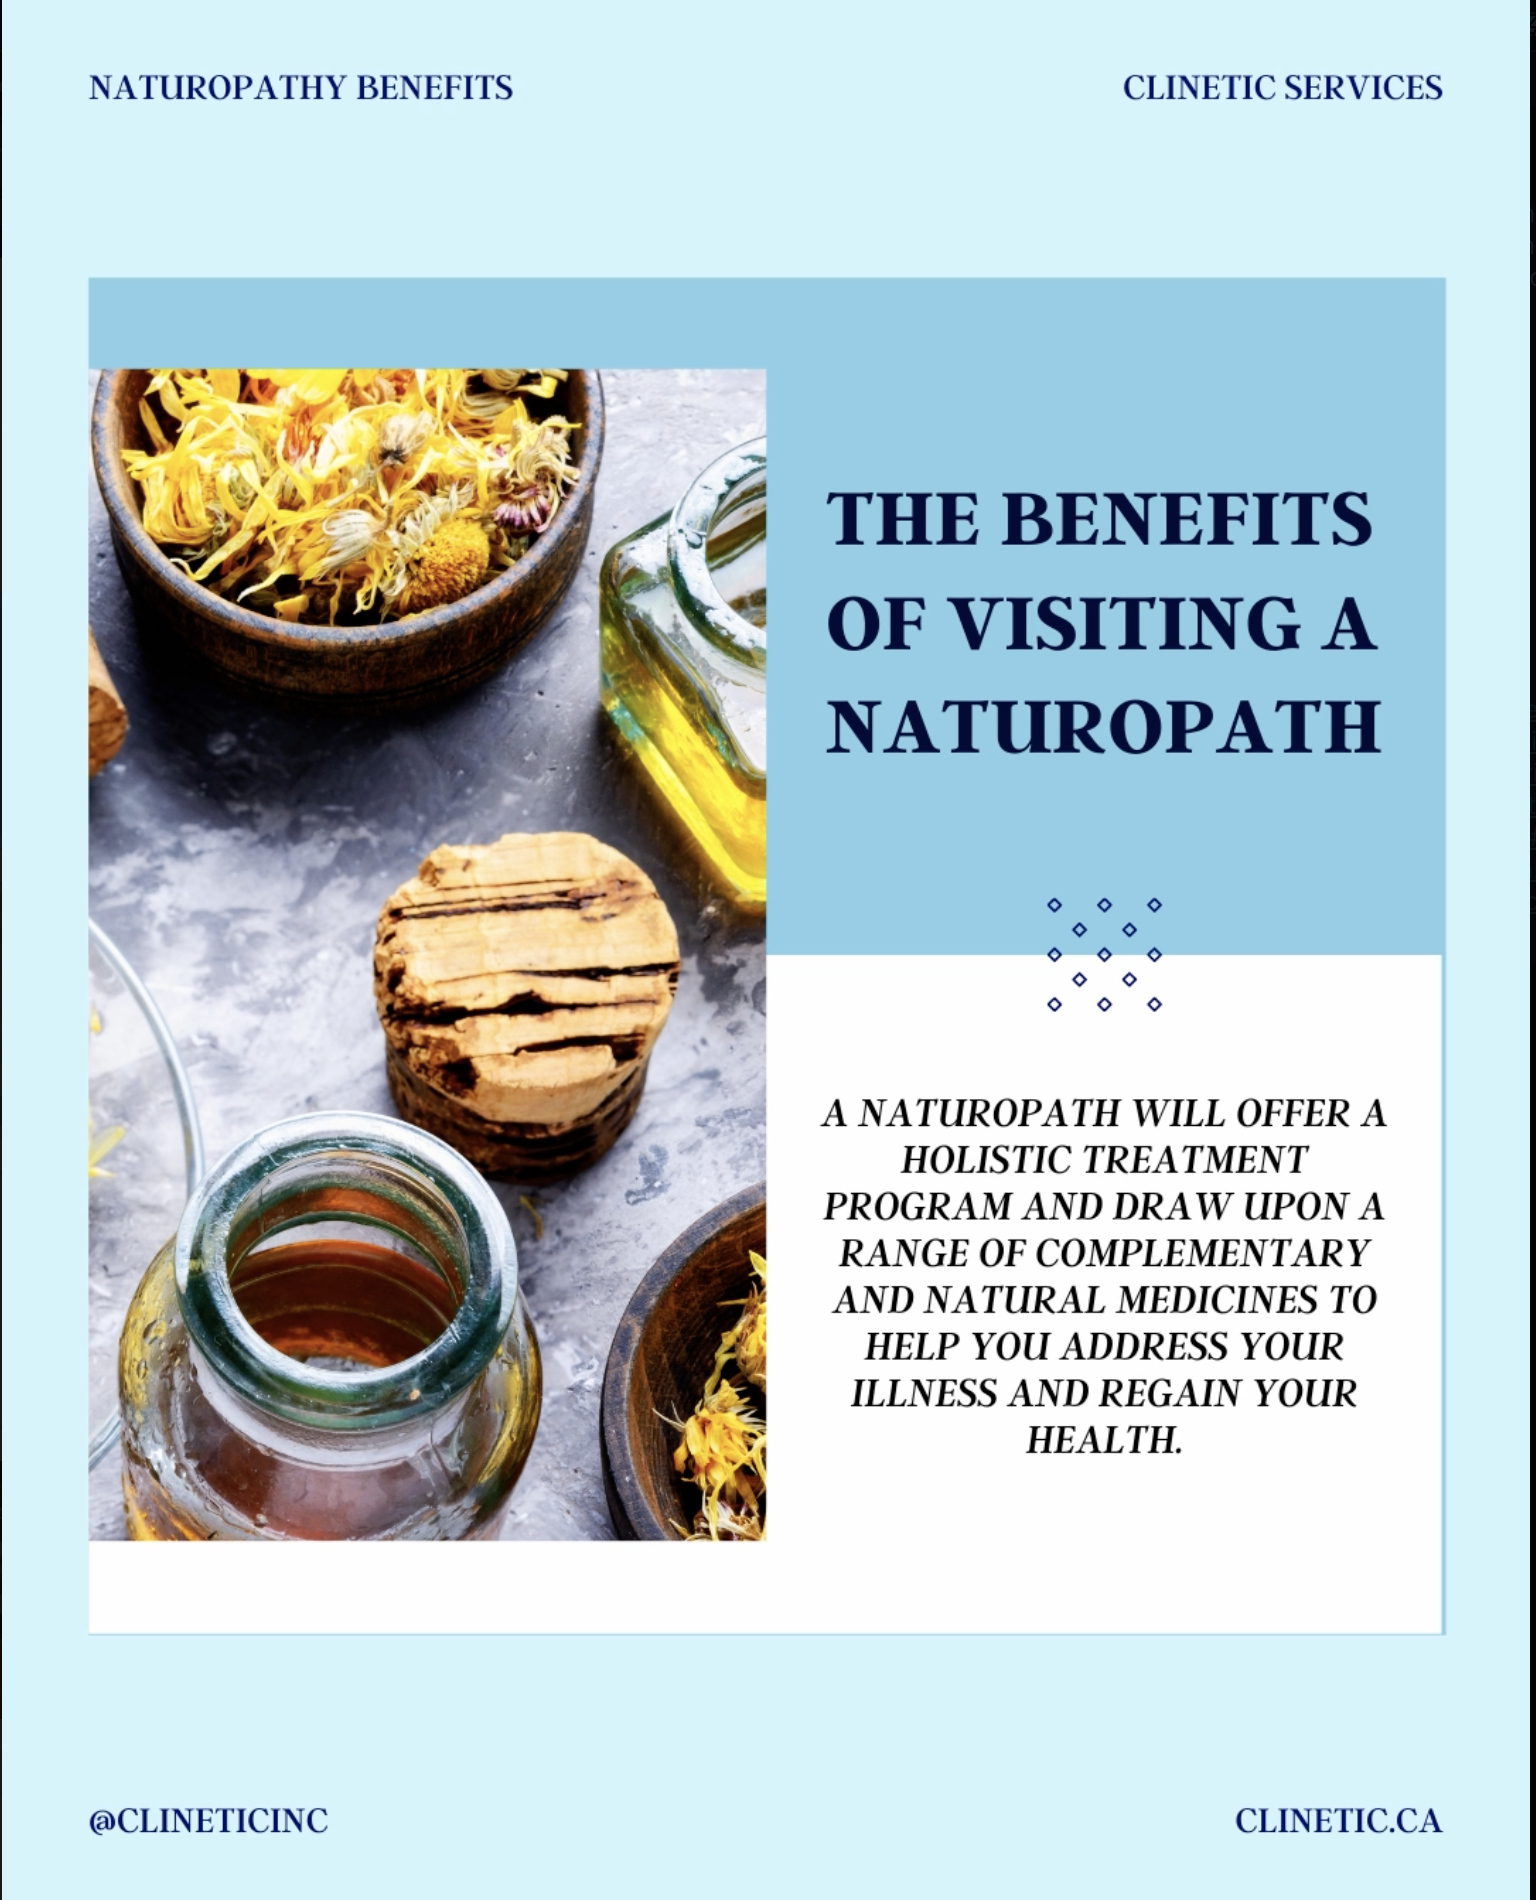 The benefits of visiting a Naturopath